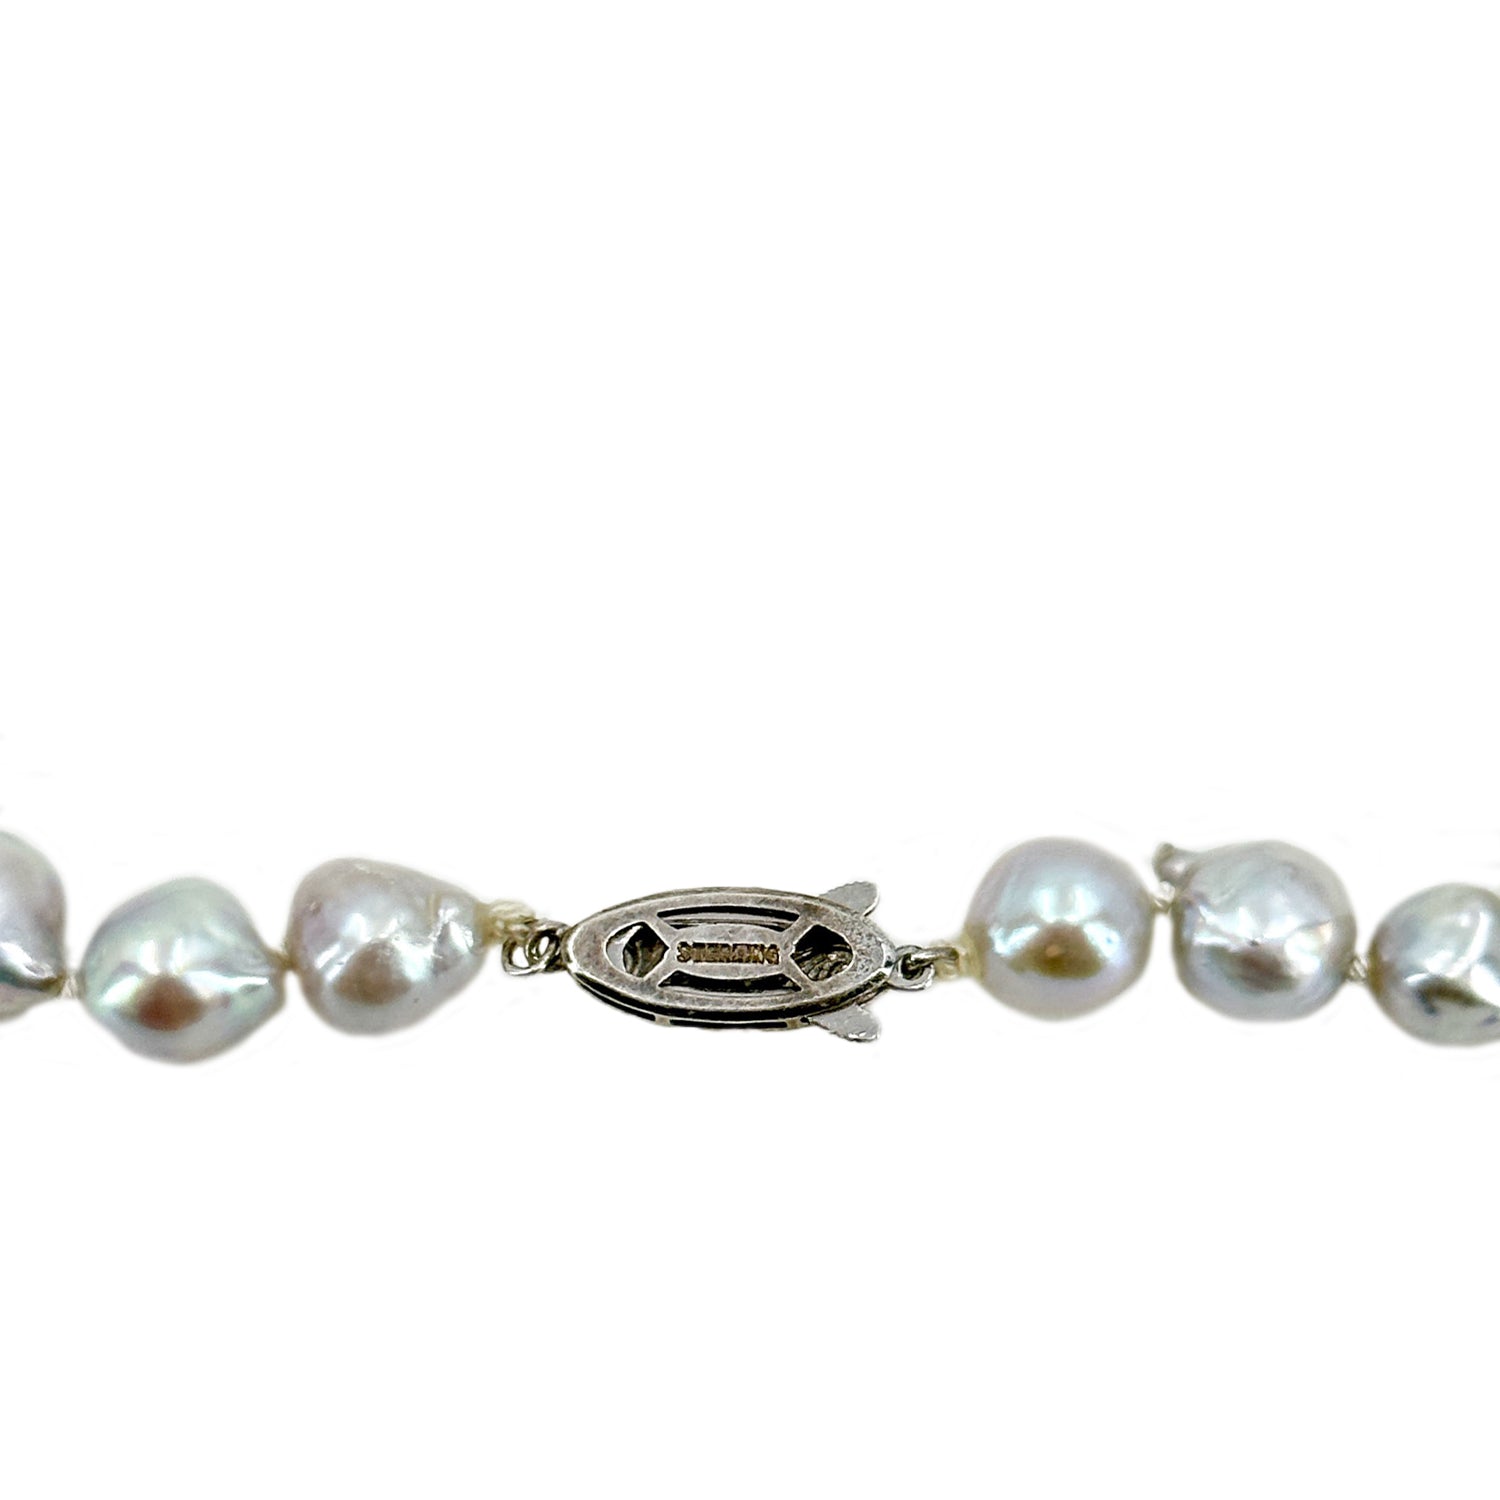 Baroque Silver Blue Vintage Mid Century Japanese Saltwater Cultured Akoya Pearl Necklace - Silver 27.50 Inch